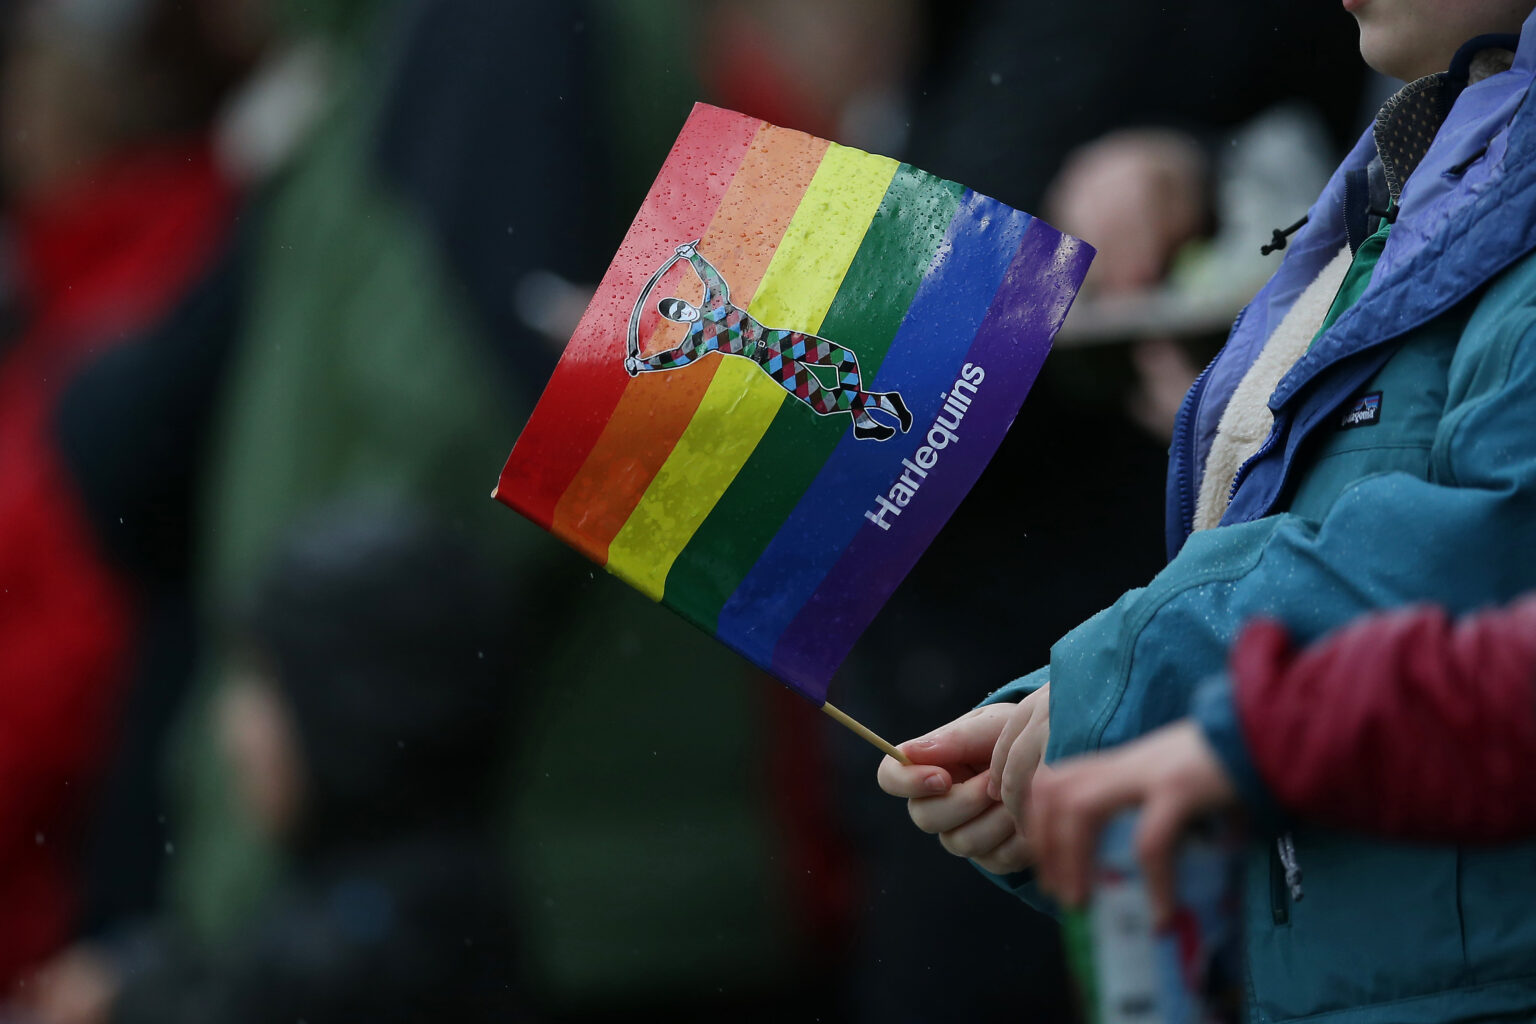 LONDON, ENGLAND - FEBRUARY 15: Supporters with rainbow flags prior to the Gallagher Premiership Rugby match between Harlequins and London Irish at  on February 15, 2020 in London, England. (Photo by Steve Bardens/Getty Images for Harlequins)